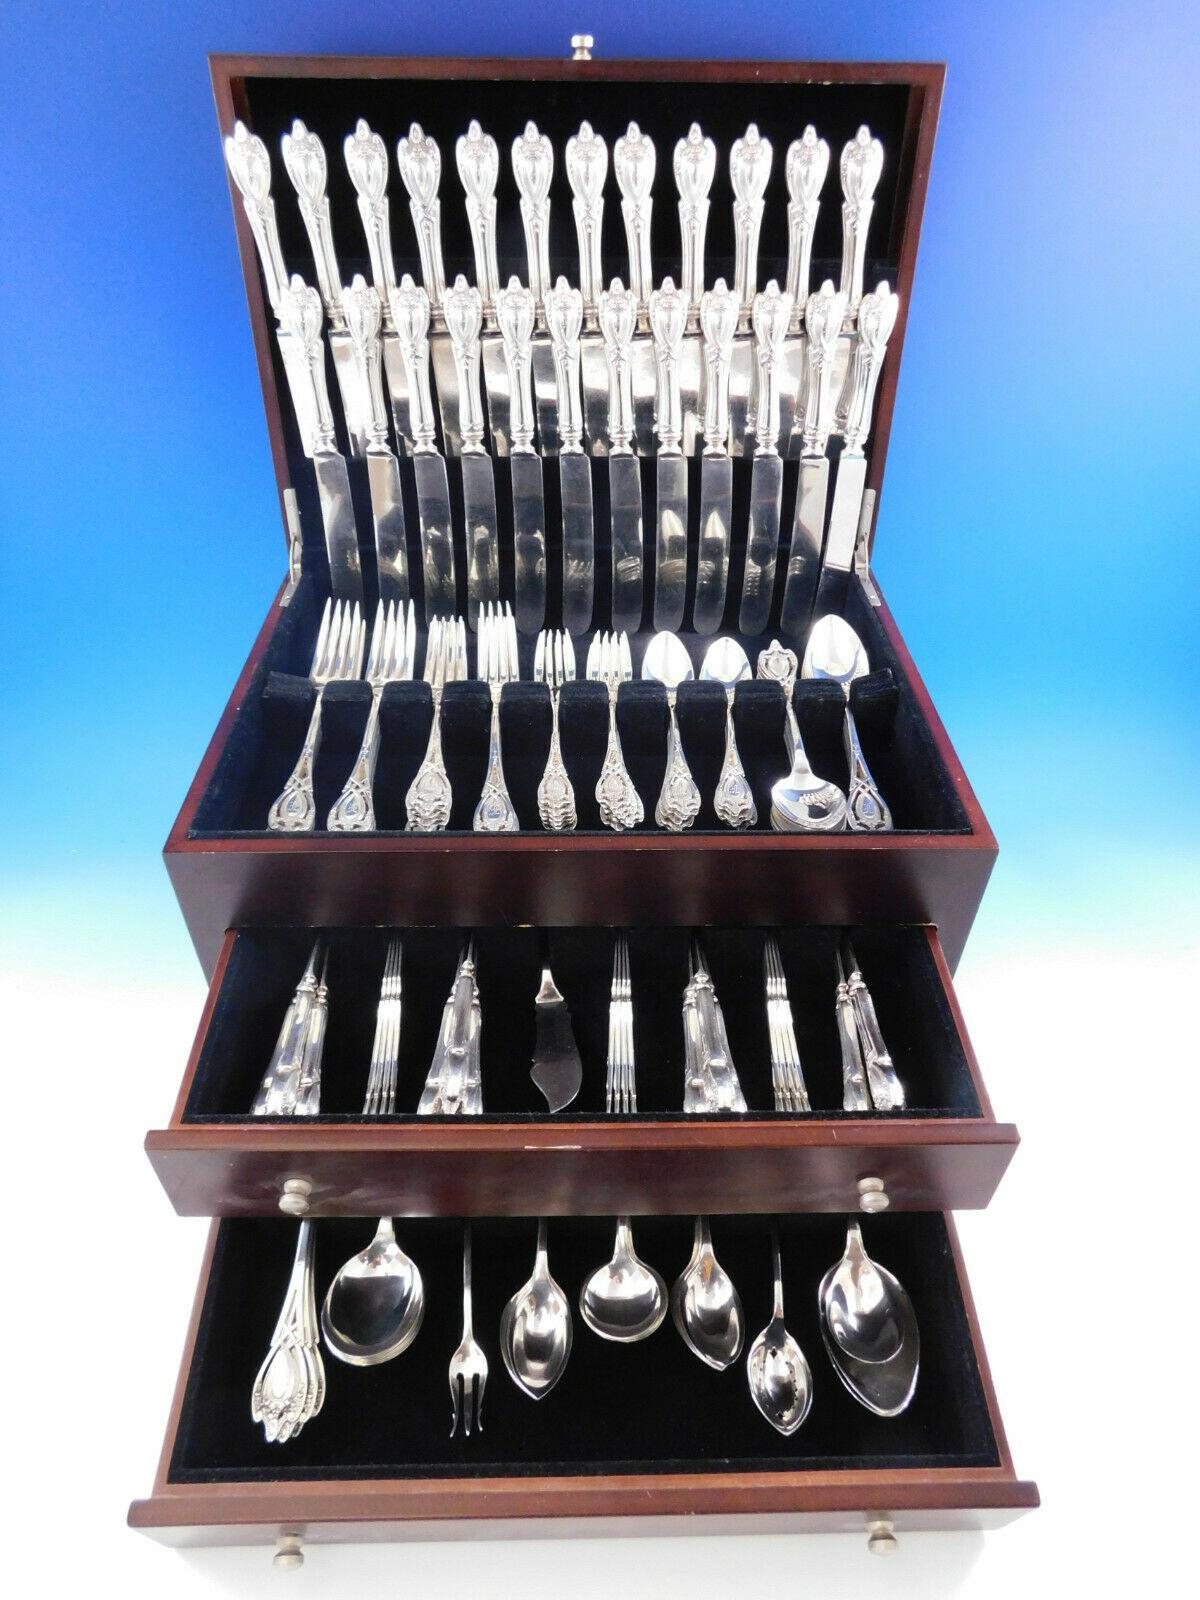 Monumental Monticello by Lunt sterling silver flatware set dinner and luncheon size, 150 pieces. This set includes:

12 dinner knives, blunt plated blades, 9 1/2